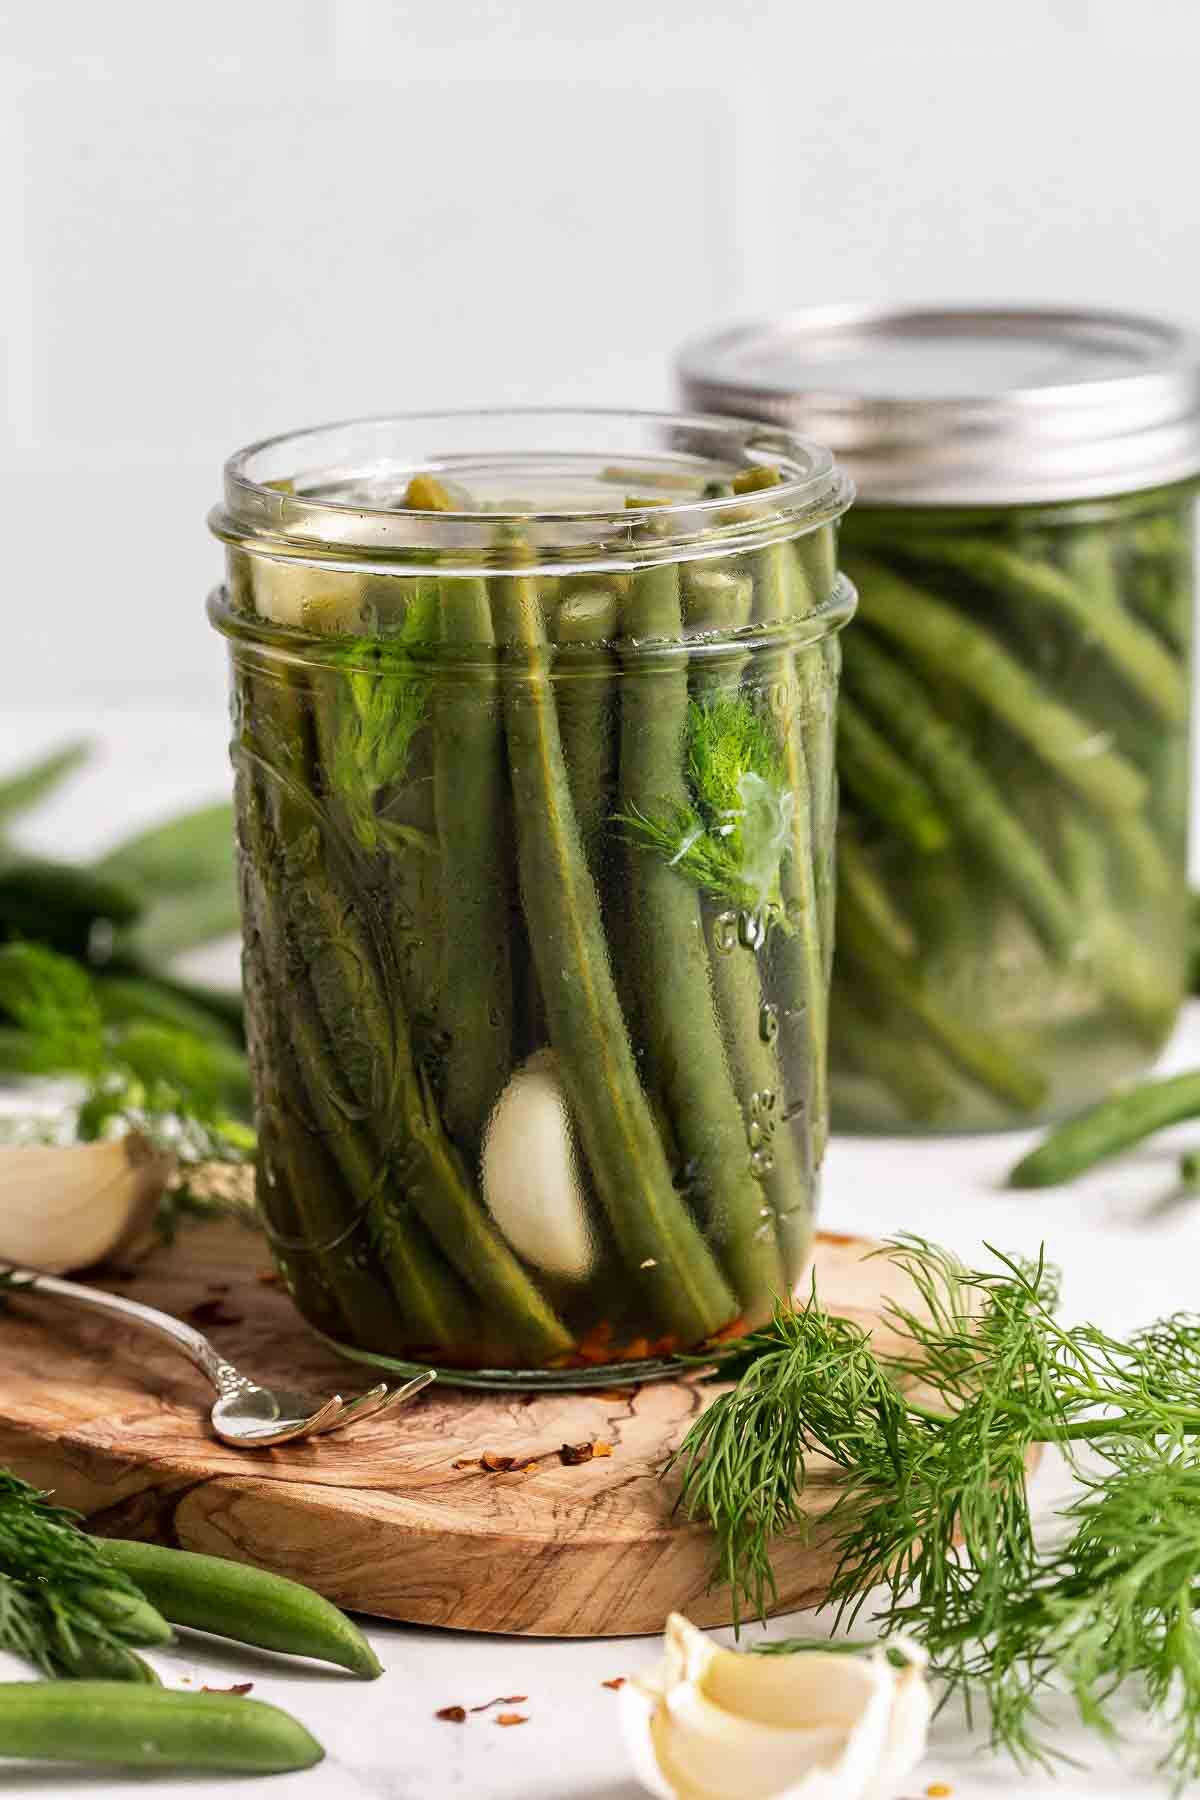 Two glass jars of pickled green beans.